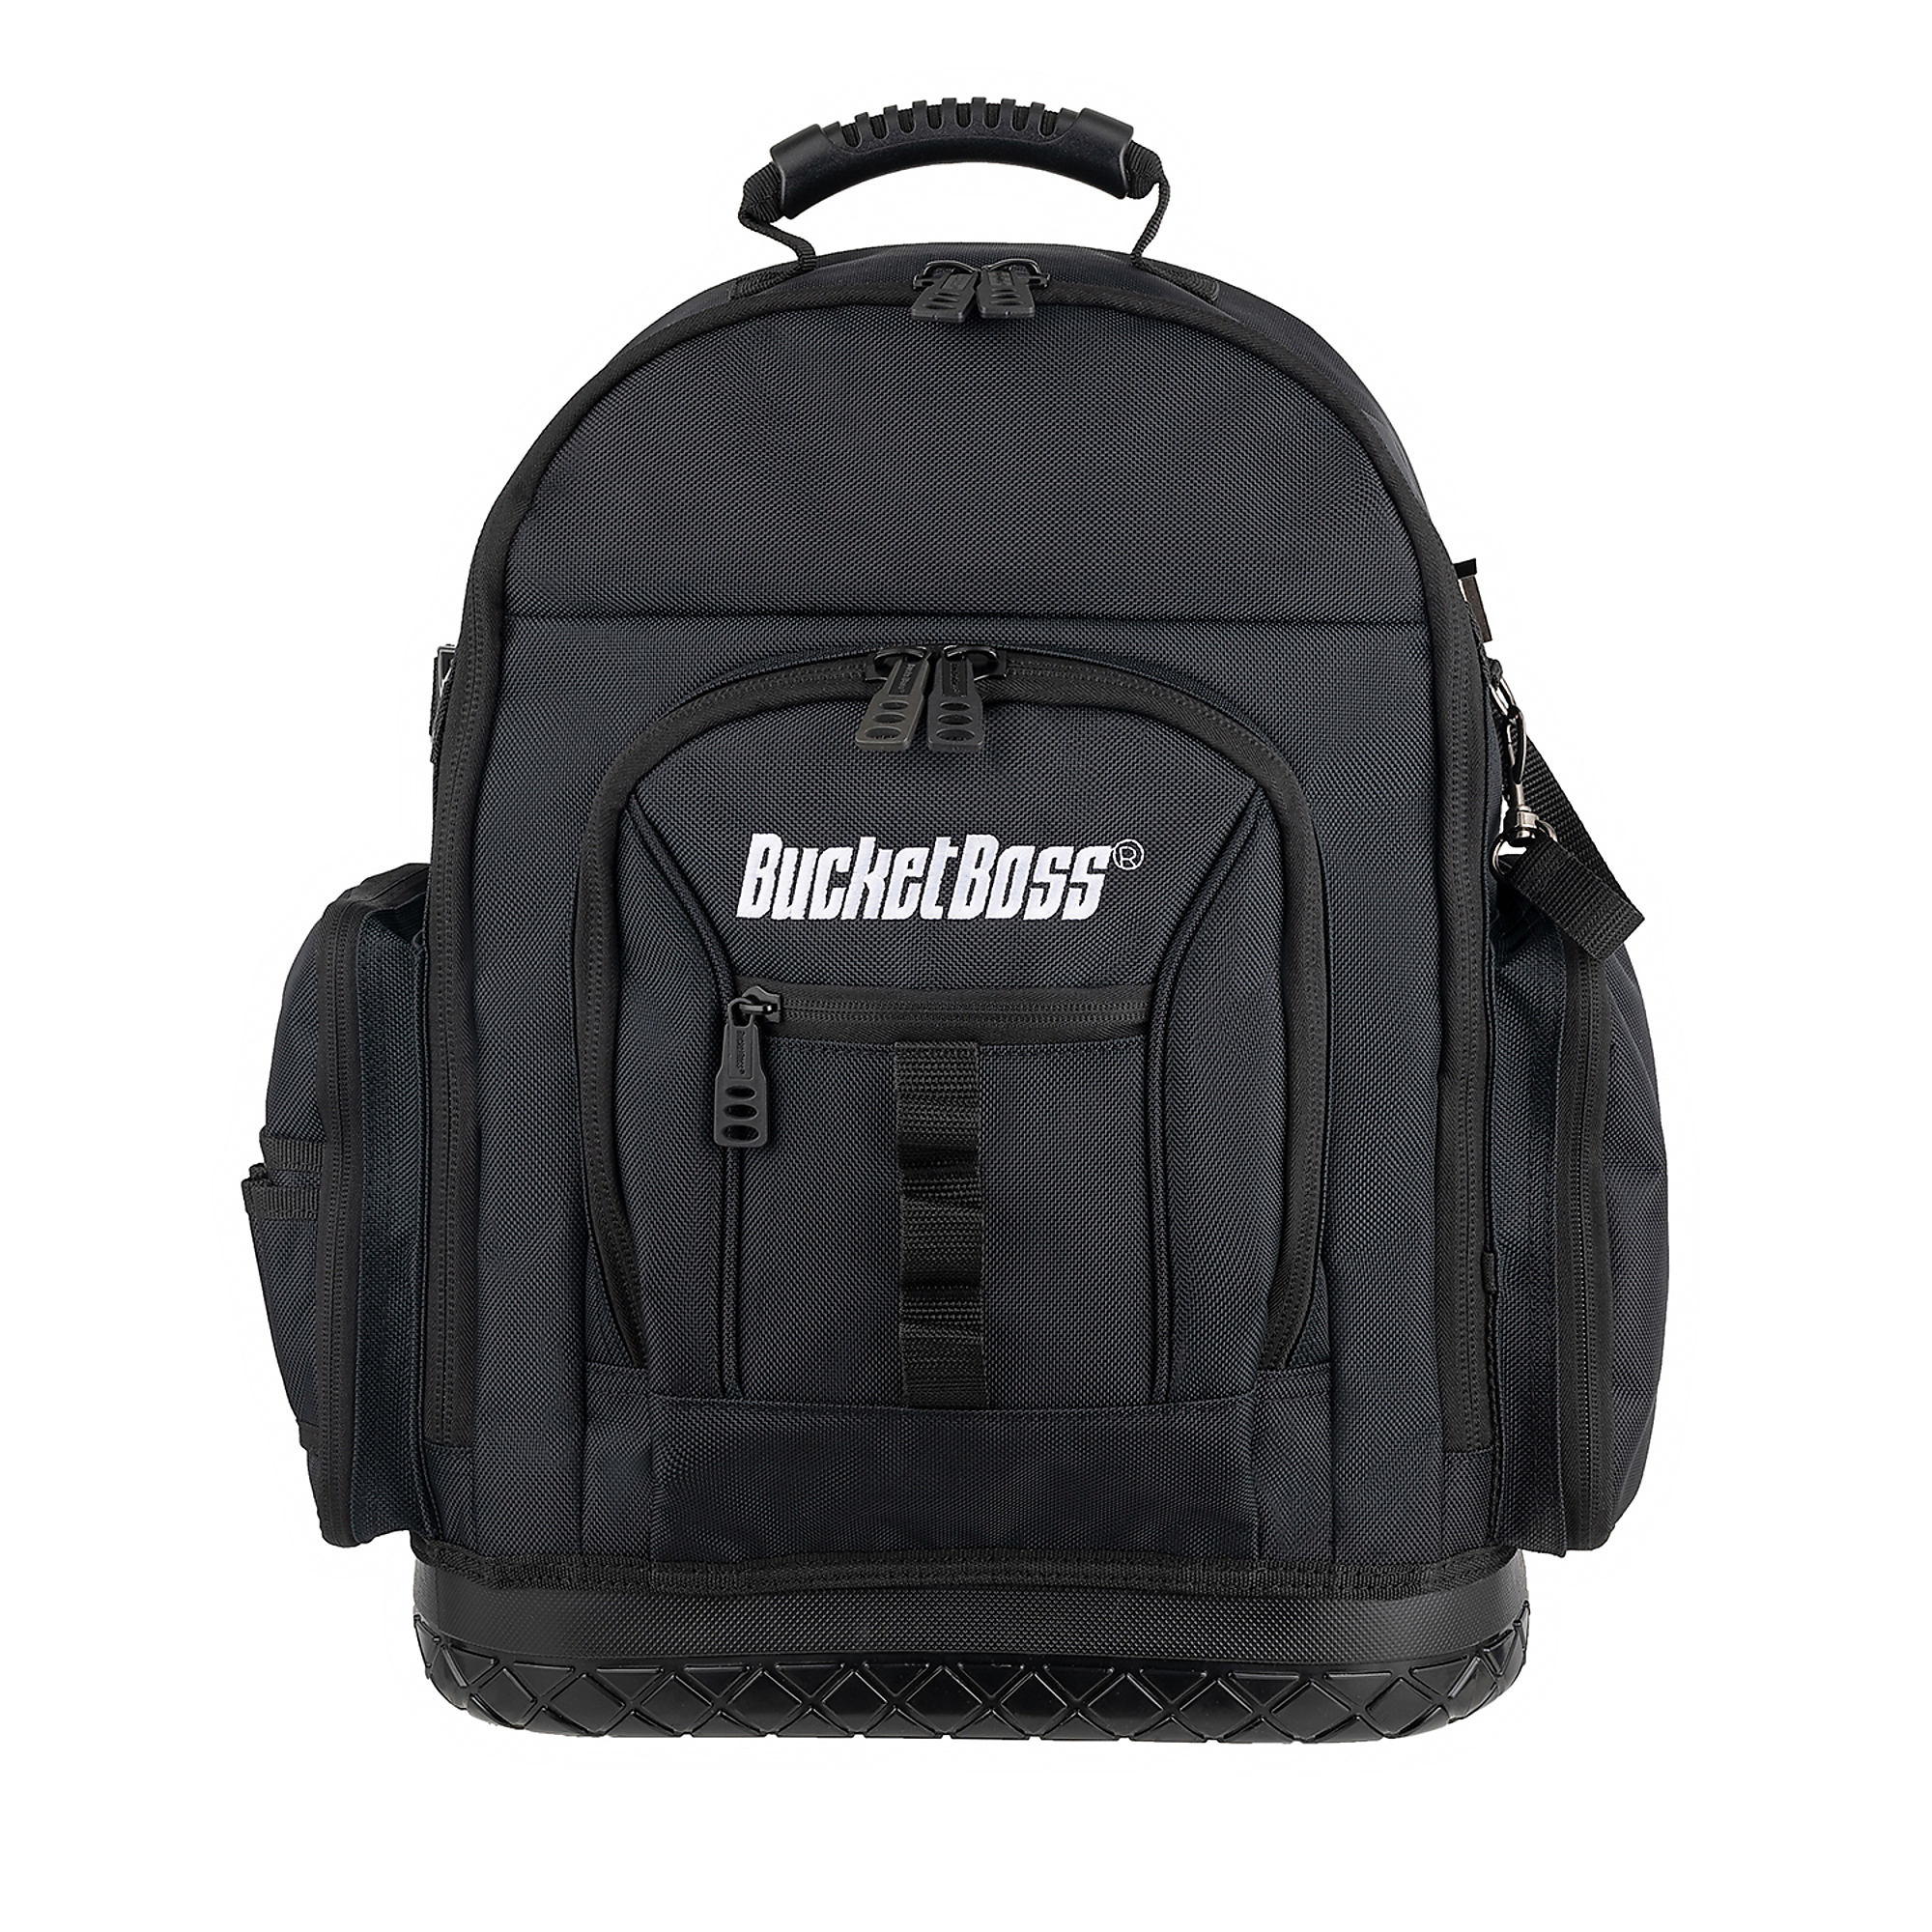 Bucket Boss, Tool Backpack, Color Black, Pockets (qty.) 36 Material Poly, Model 65158